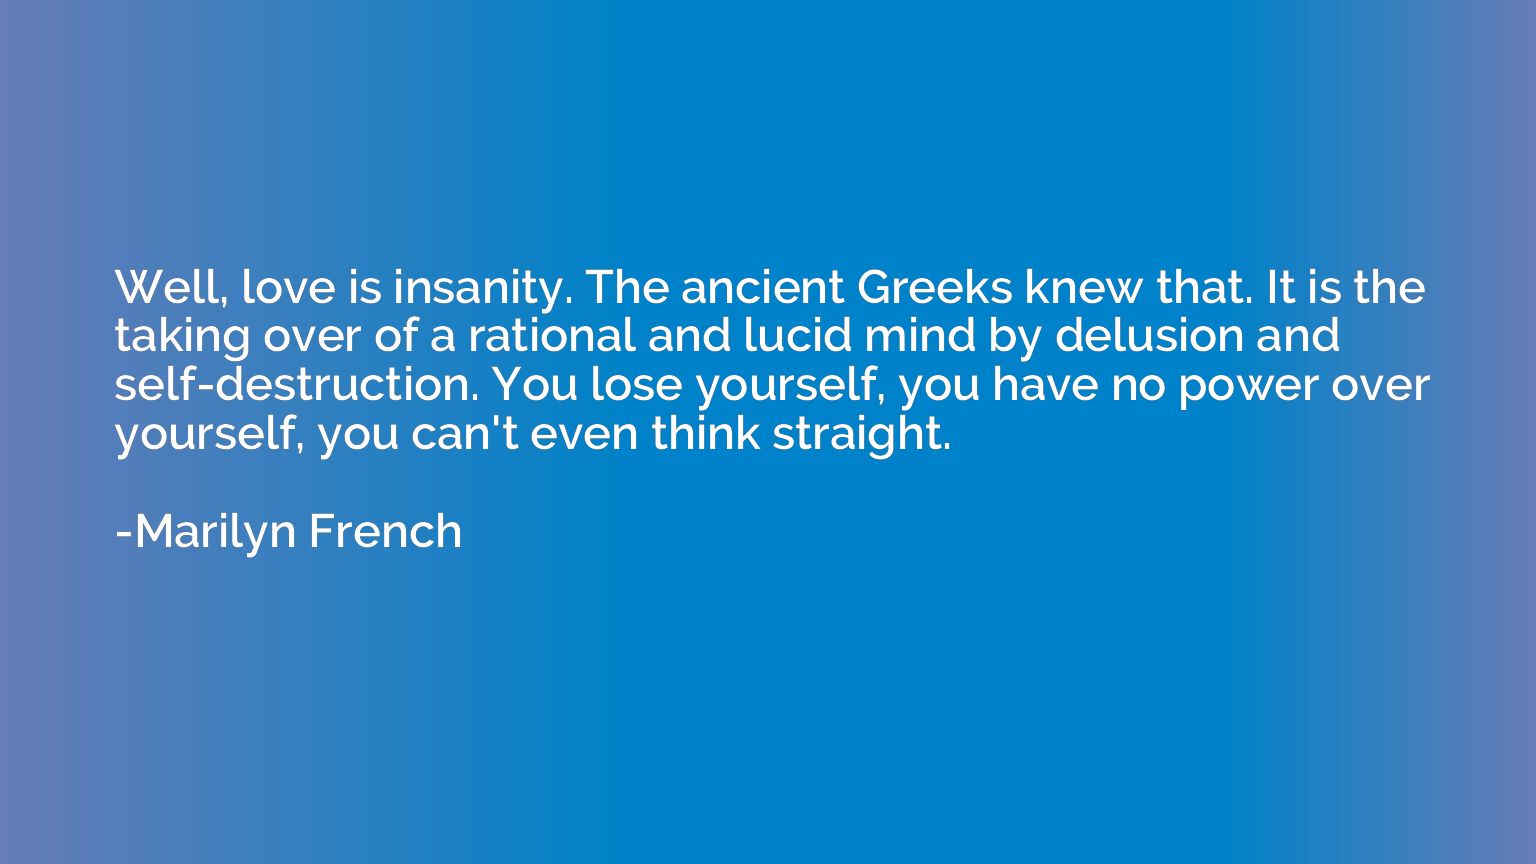 Well, love is insanity. The ancient Greeks knew that. It is 